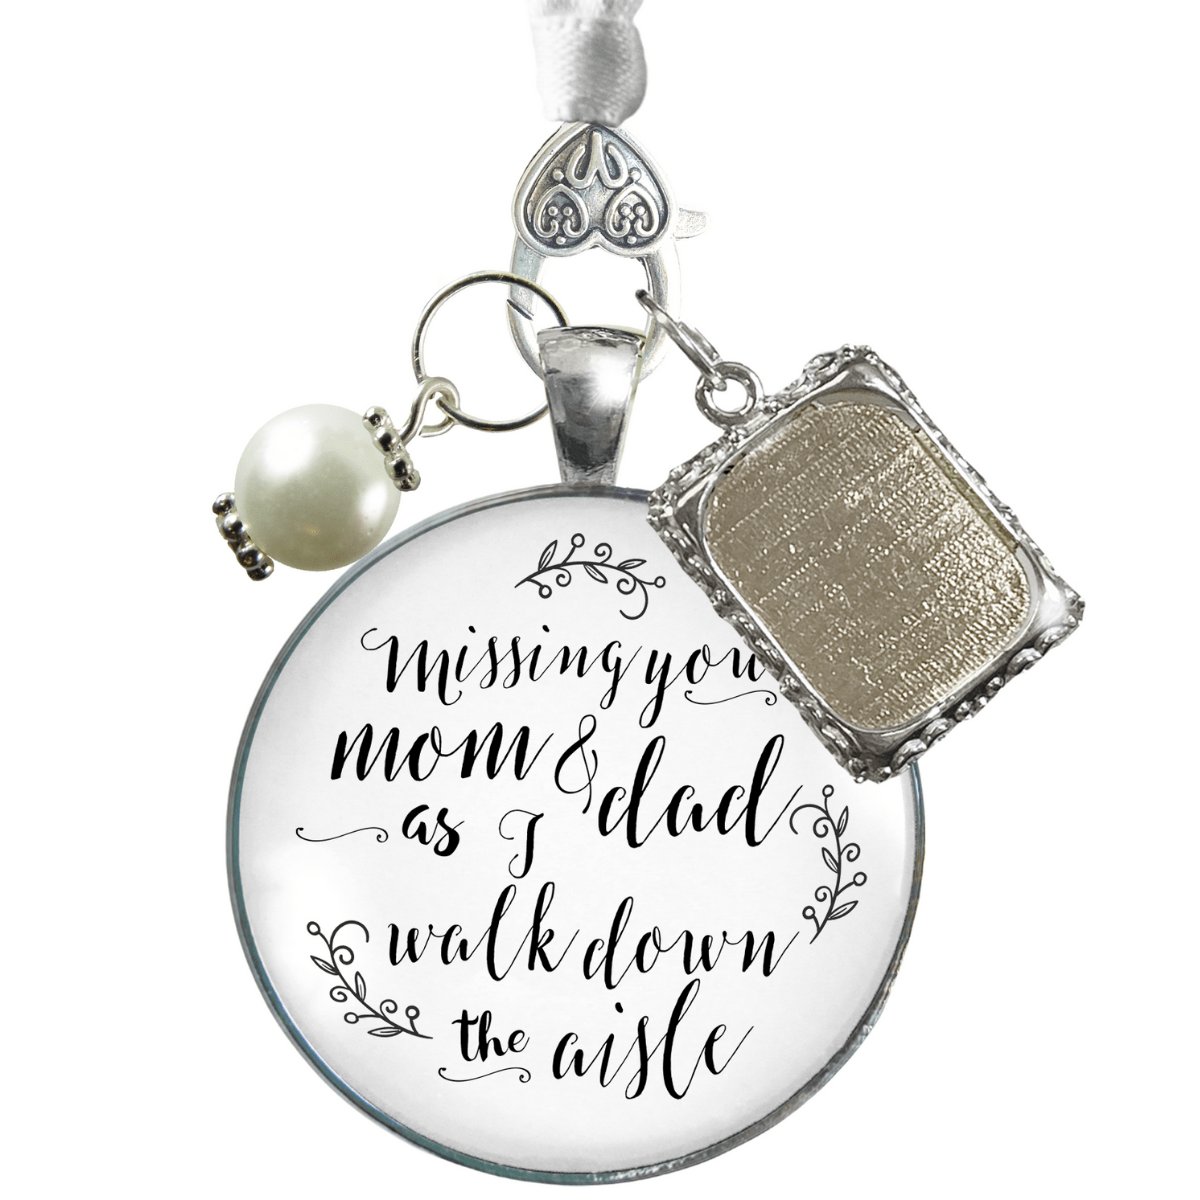 Bouquet Charm Of Mom And Dad White Silver Finish Memory Photo Frame Wedding Jewelry - Gutsy Goodness Handmade Jewelry Gifts